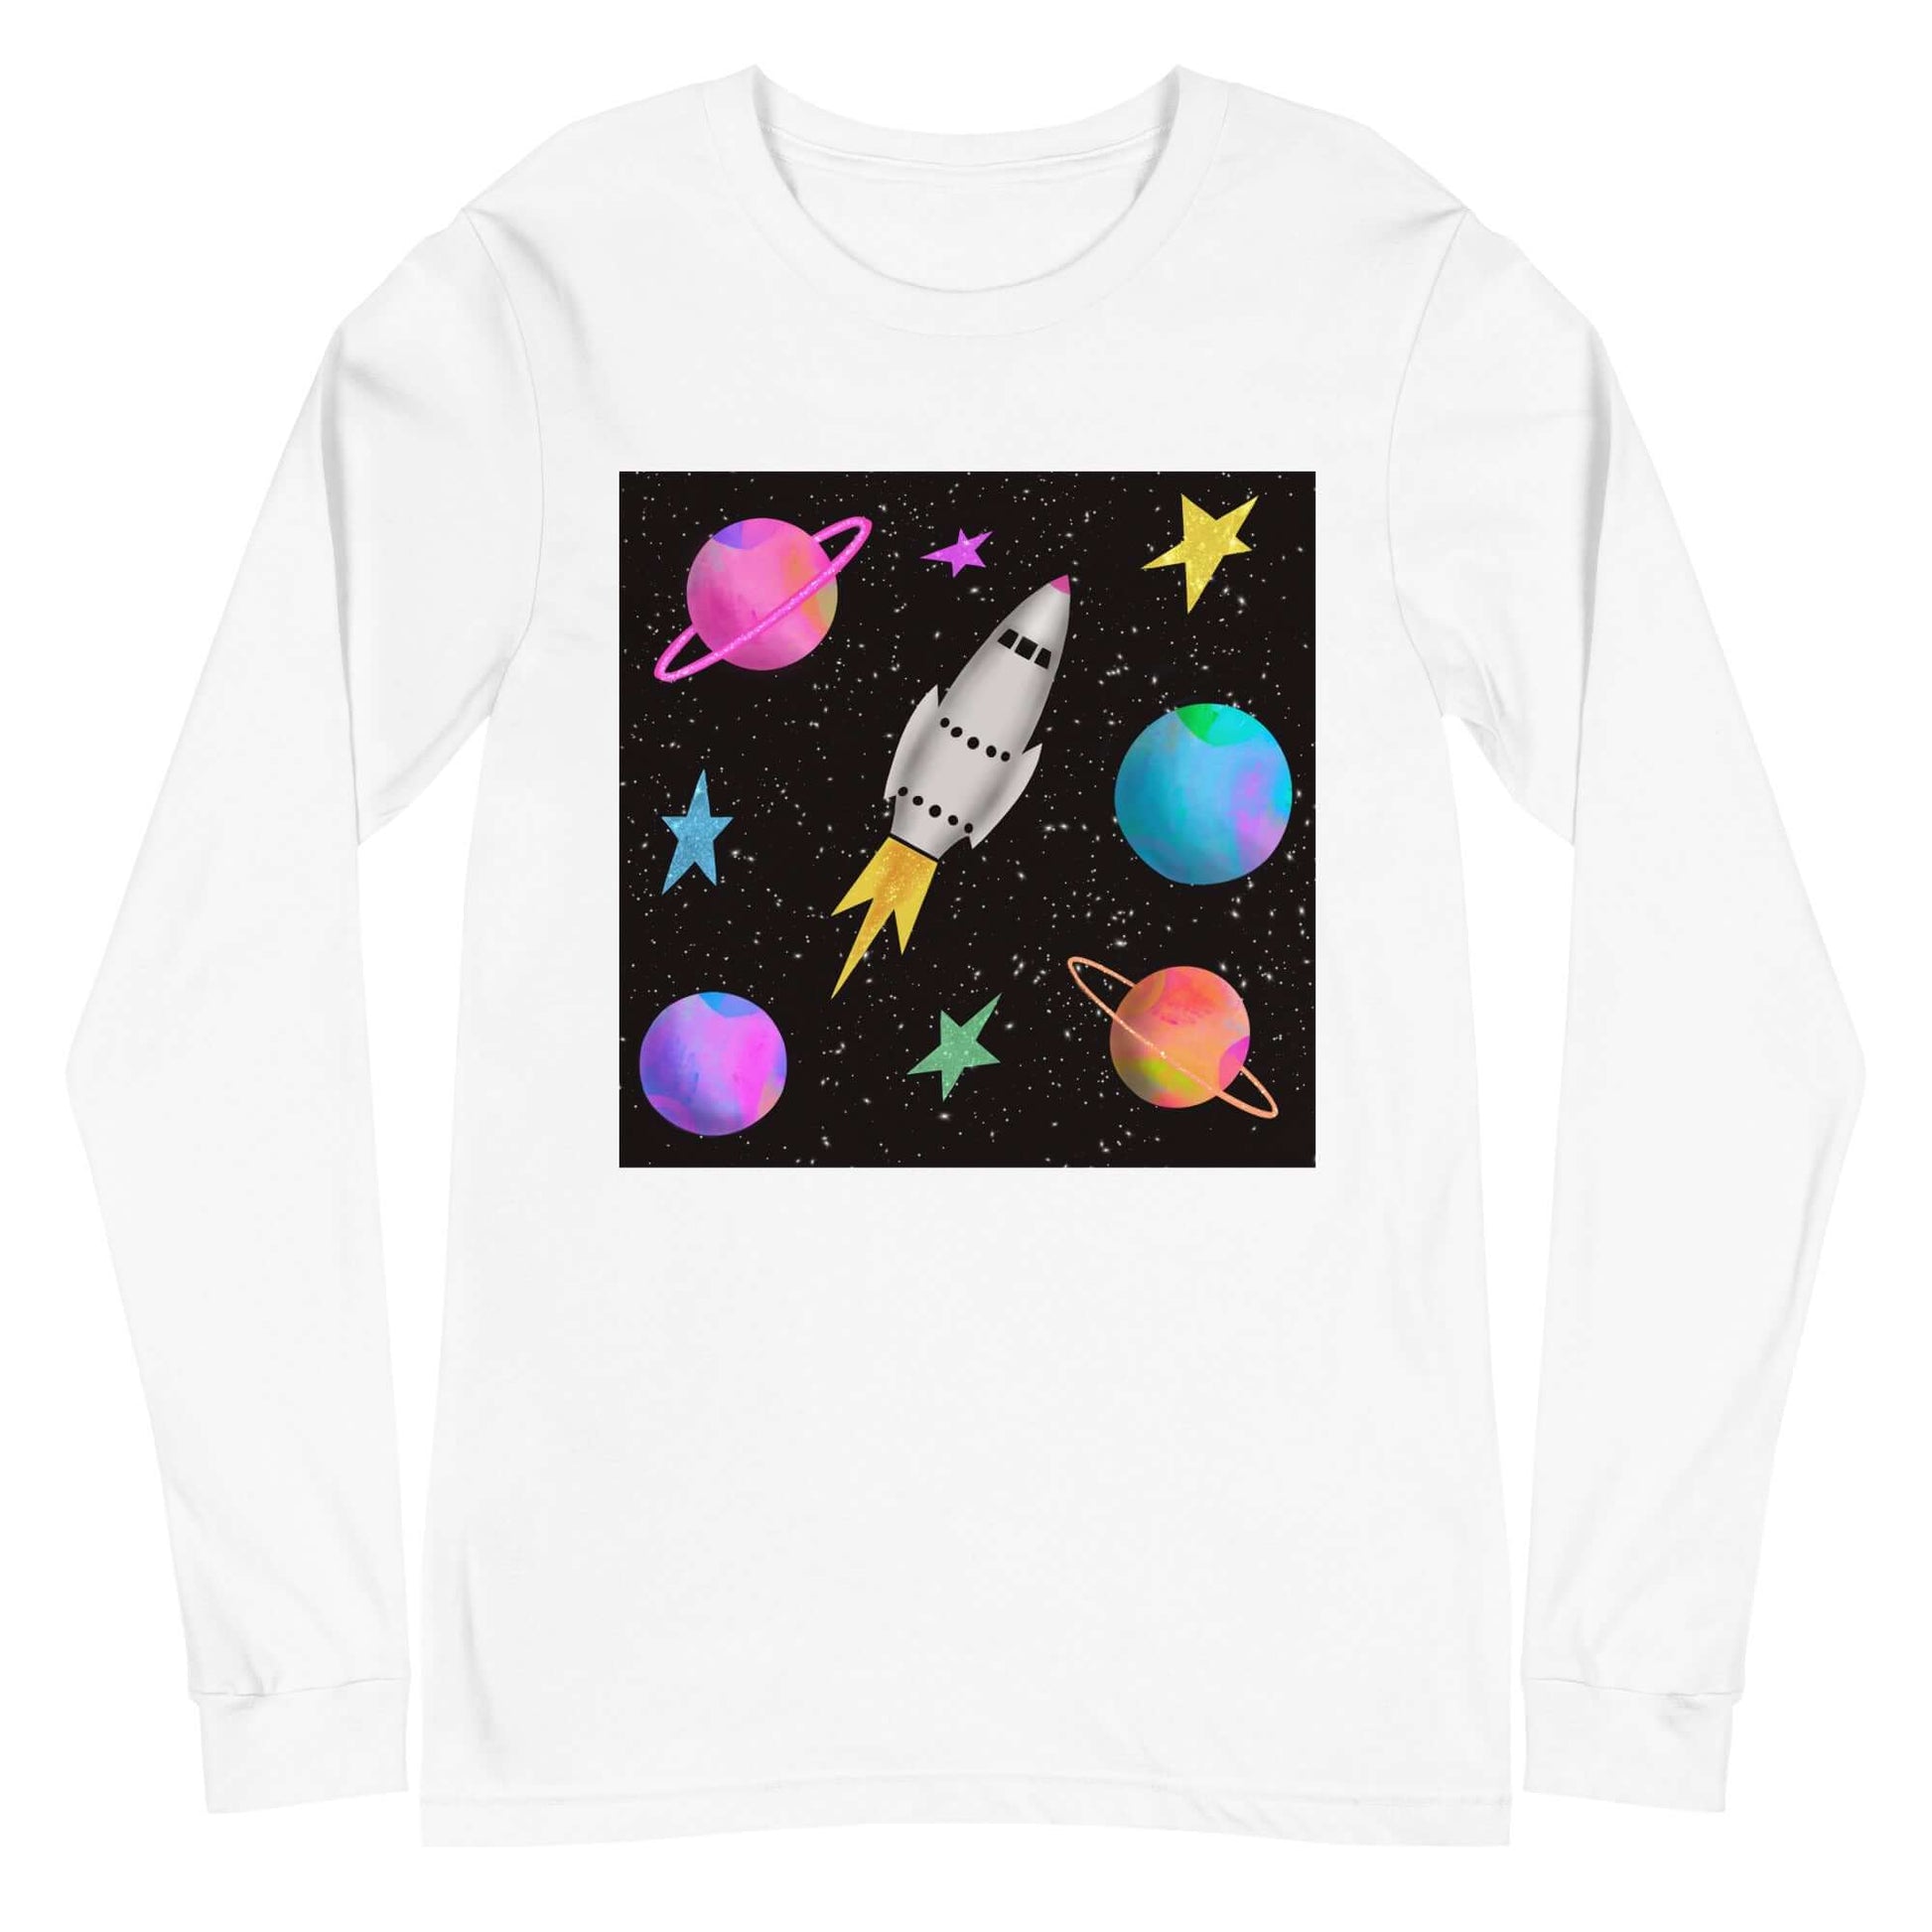 Whimsical Space Rocket with Colorful Planets and Stars on Black Background “Space Rockets” Unisex Long Sleeve Tee in White